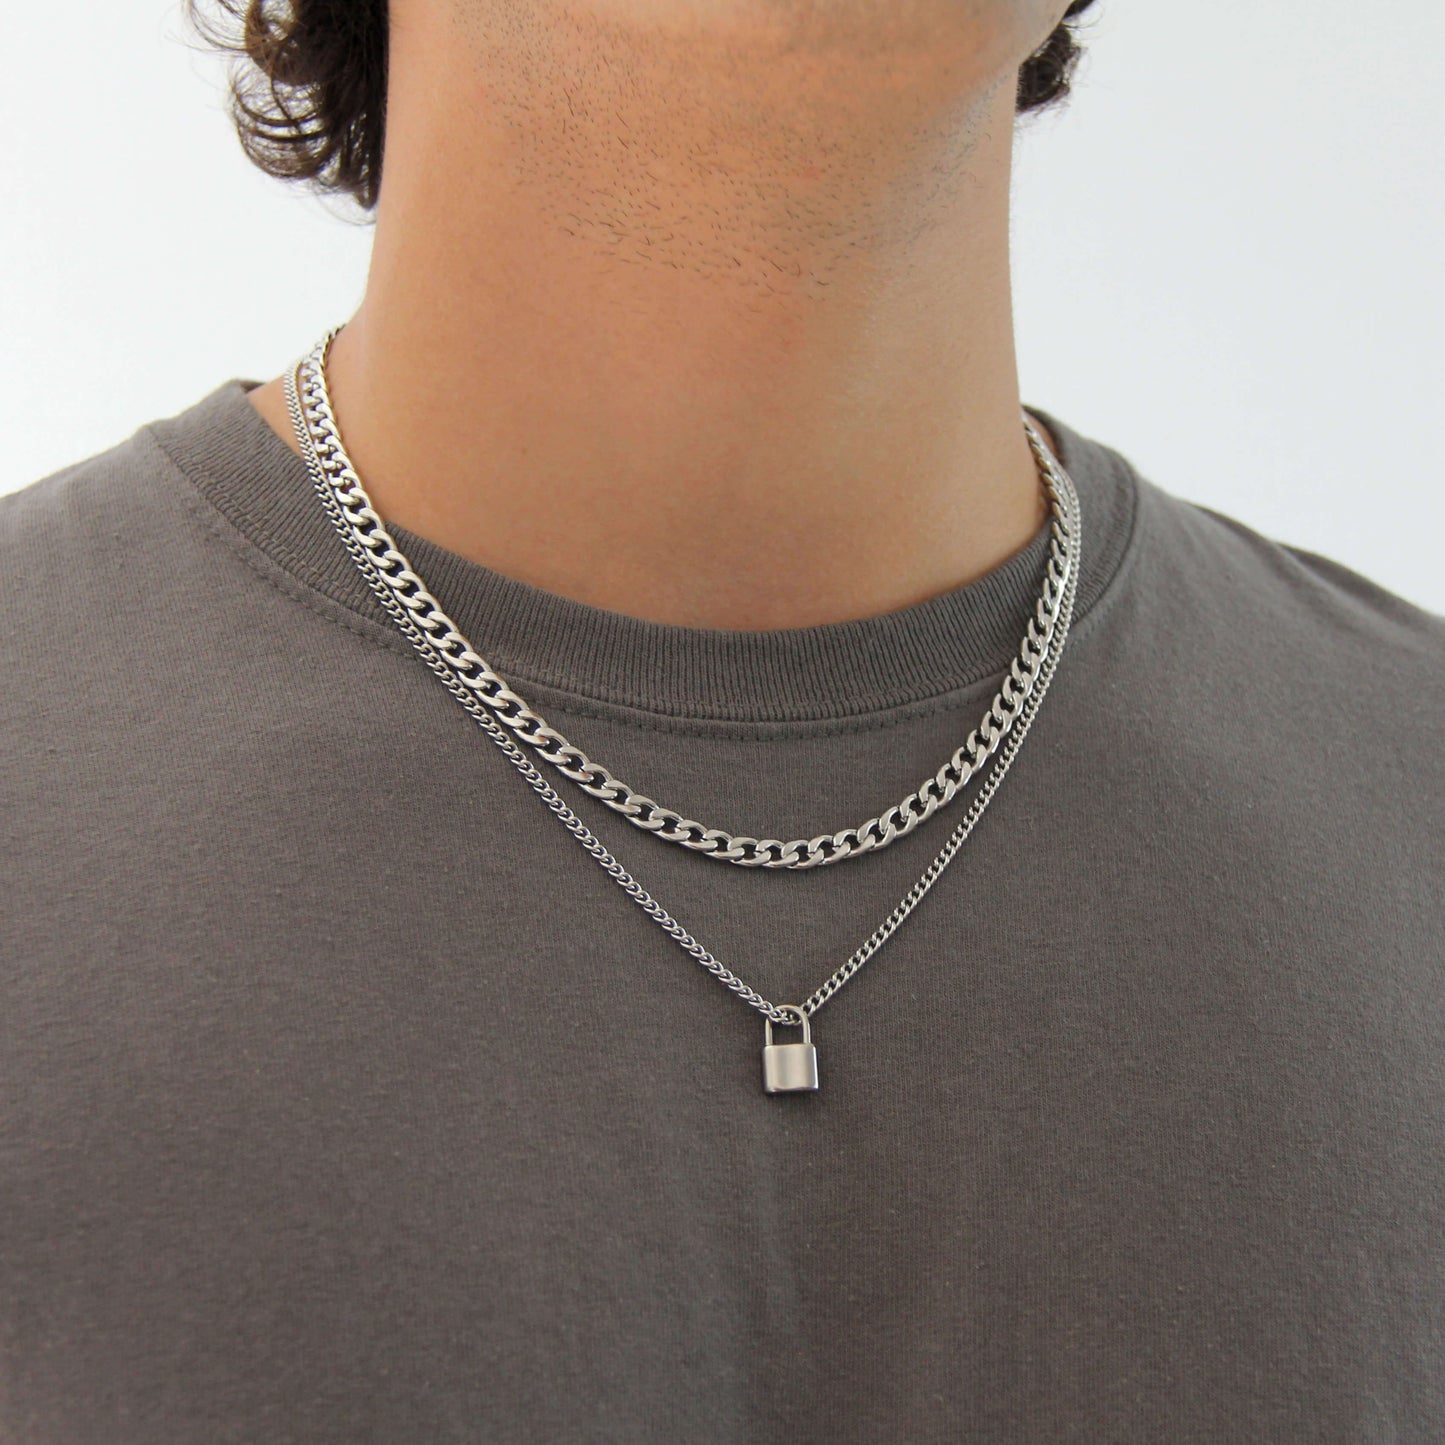 Silver Necklace Set For Men : 6mm Curb Chain and Lock Pendant Necklace - Boutique Wear RENN